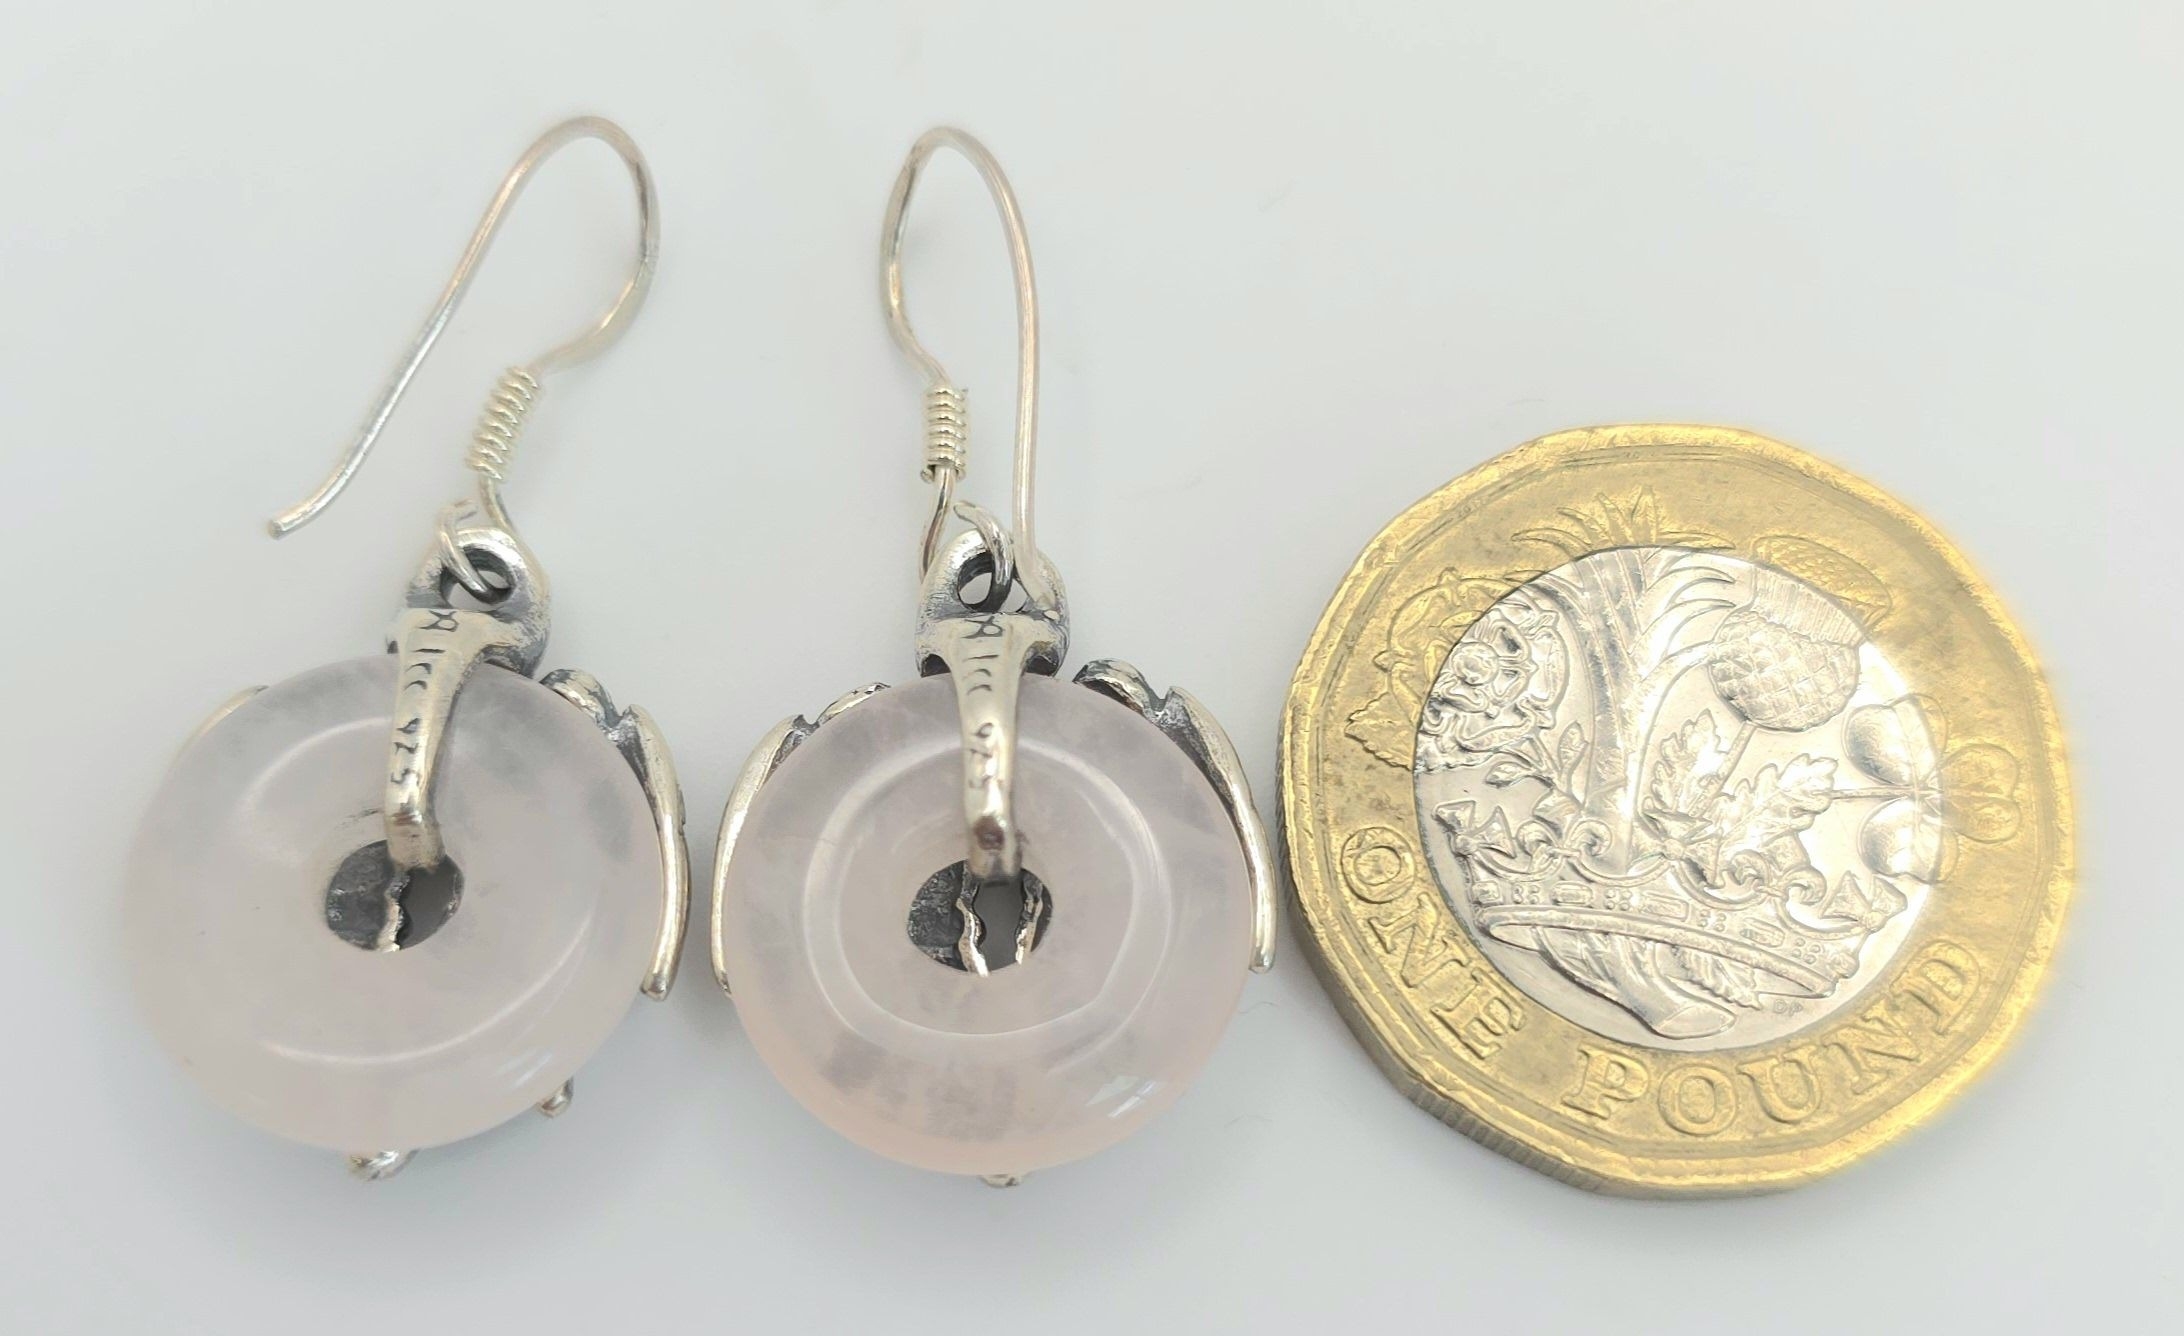 A Unique Pair of Sterling Silver and Rose Quartz Angel Design Earrings. 3cm Drop. 1.5cm Wide. - Image 4 of 5